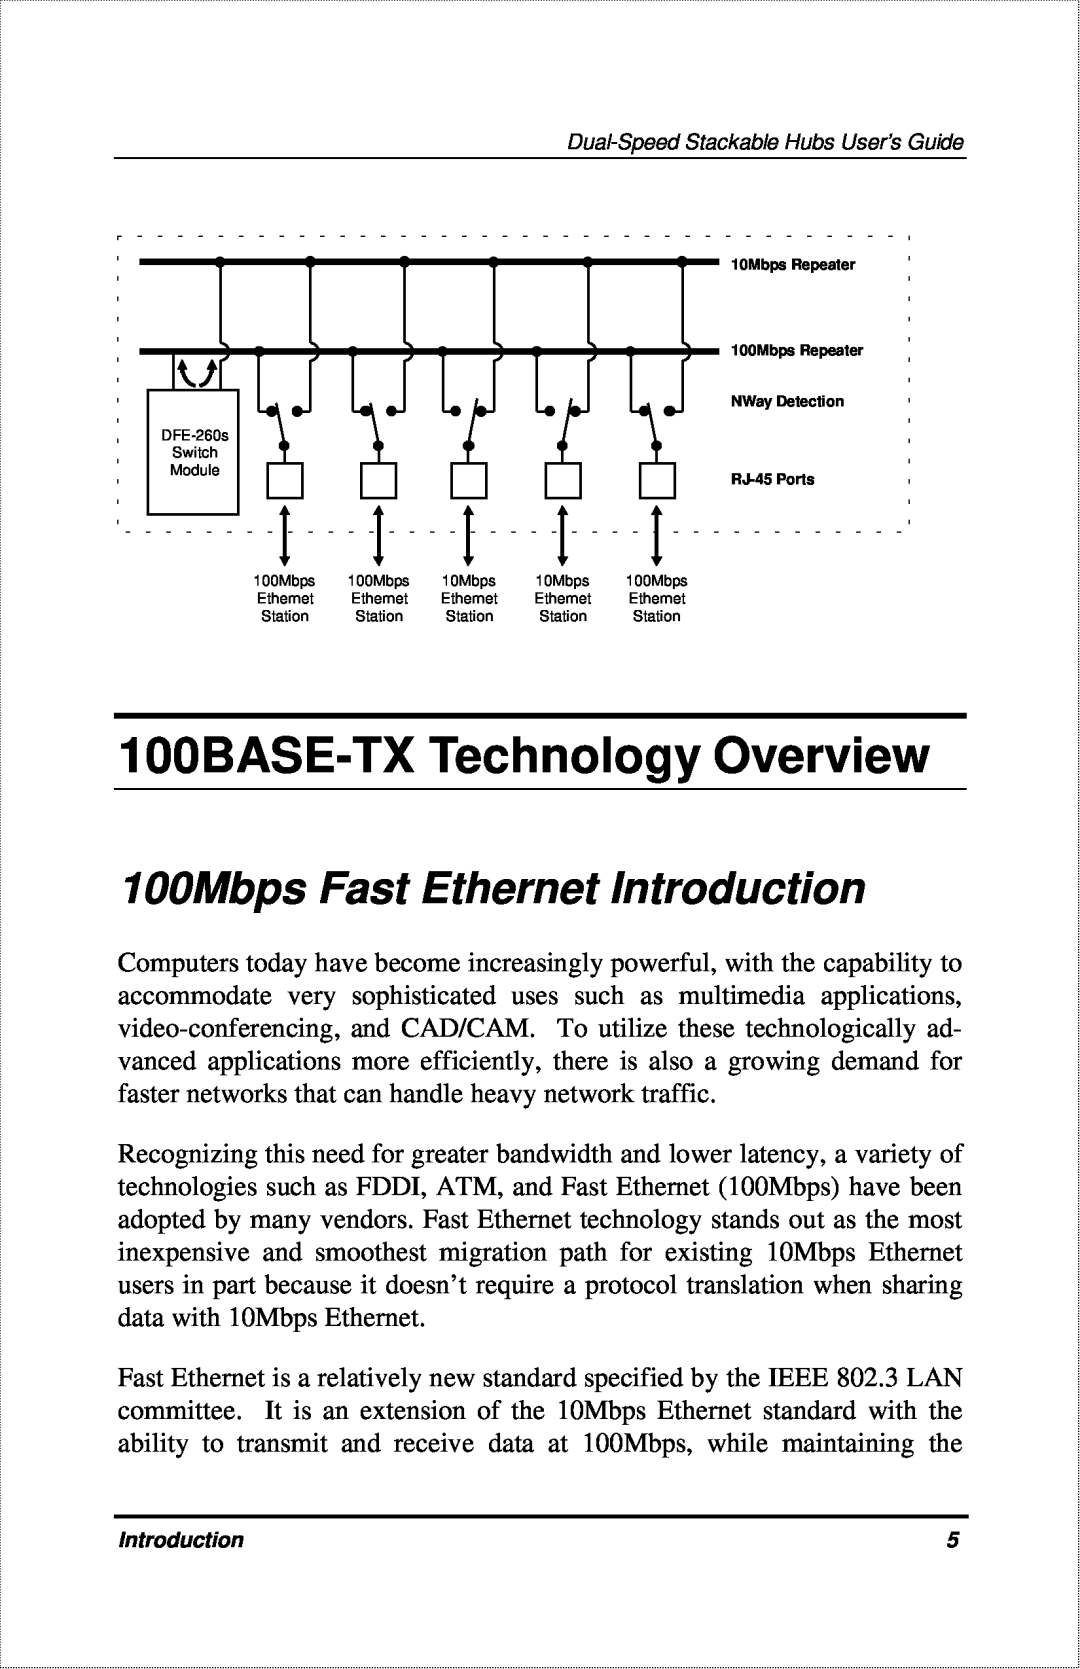 D-Link DFE-916X manual 100BASE-TX Technology Overview, 100Mbps Fast Ethernet Introduction 